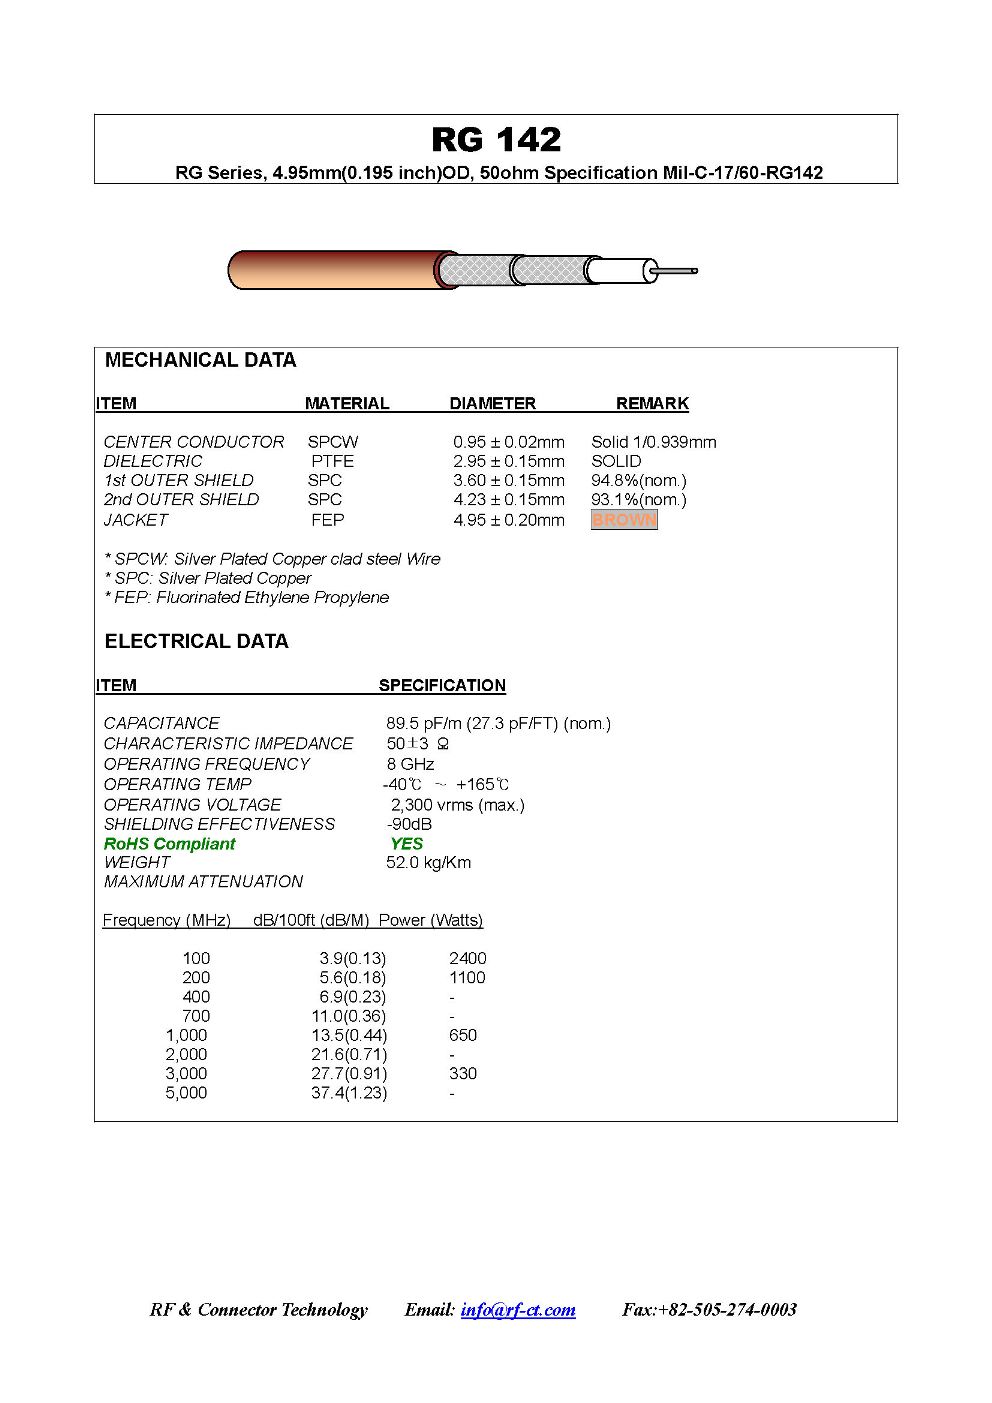 RG 142 cable RF coaxial - Specification